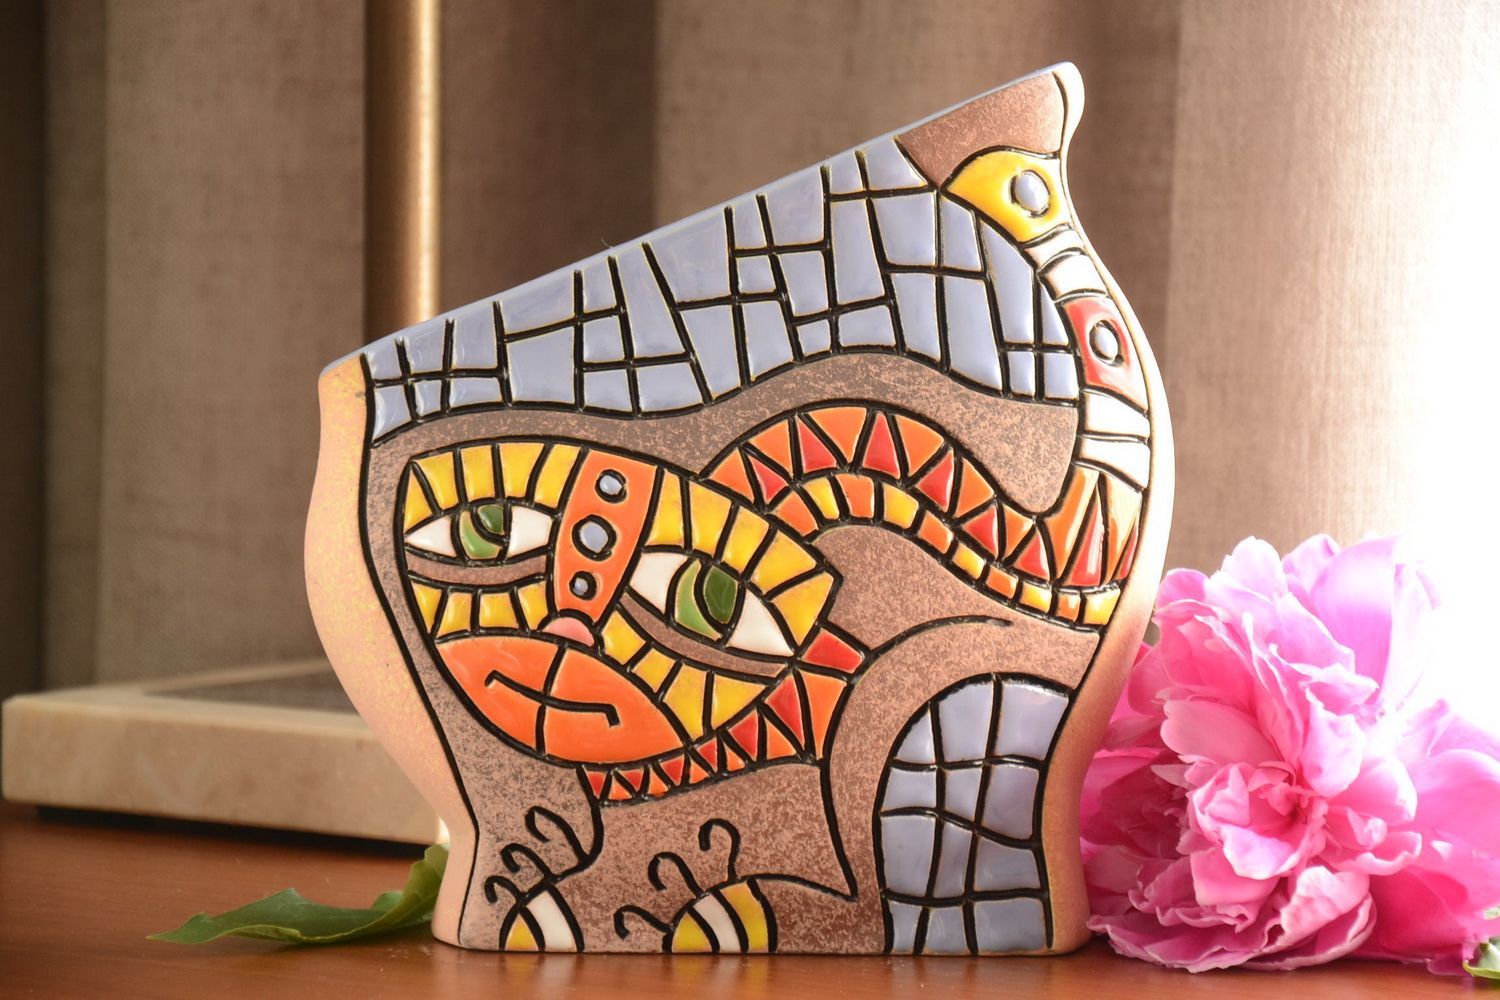 8 inches square art style bright cat shape vase for shelf or table décor 40 oz, 2,4 lb photo 1